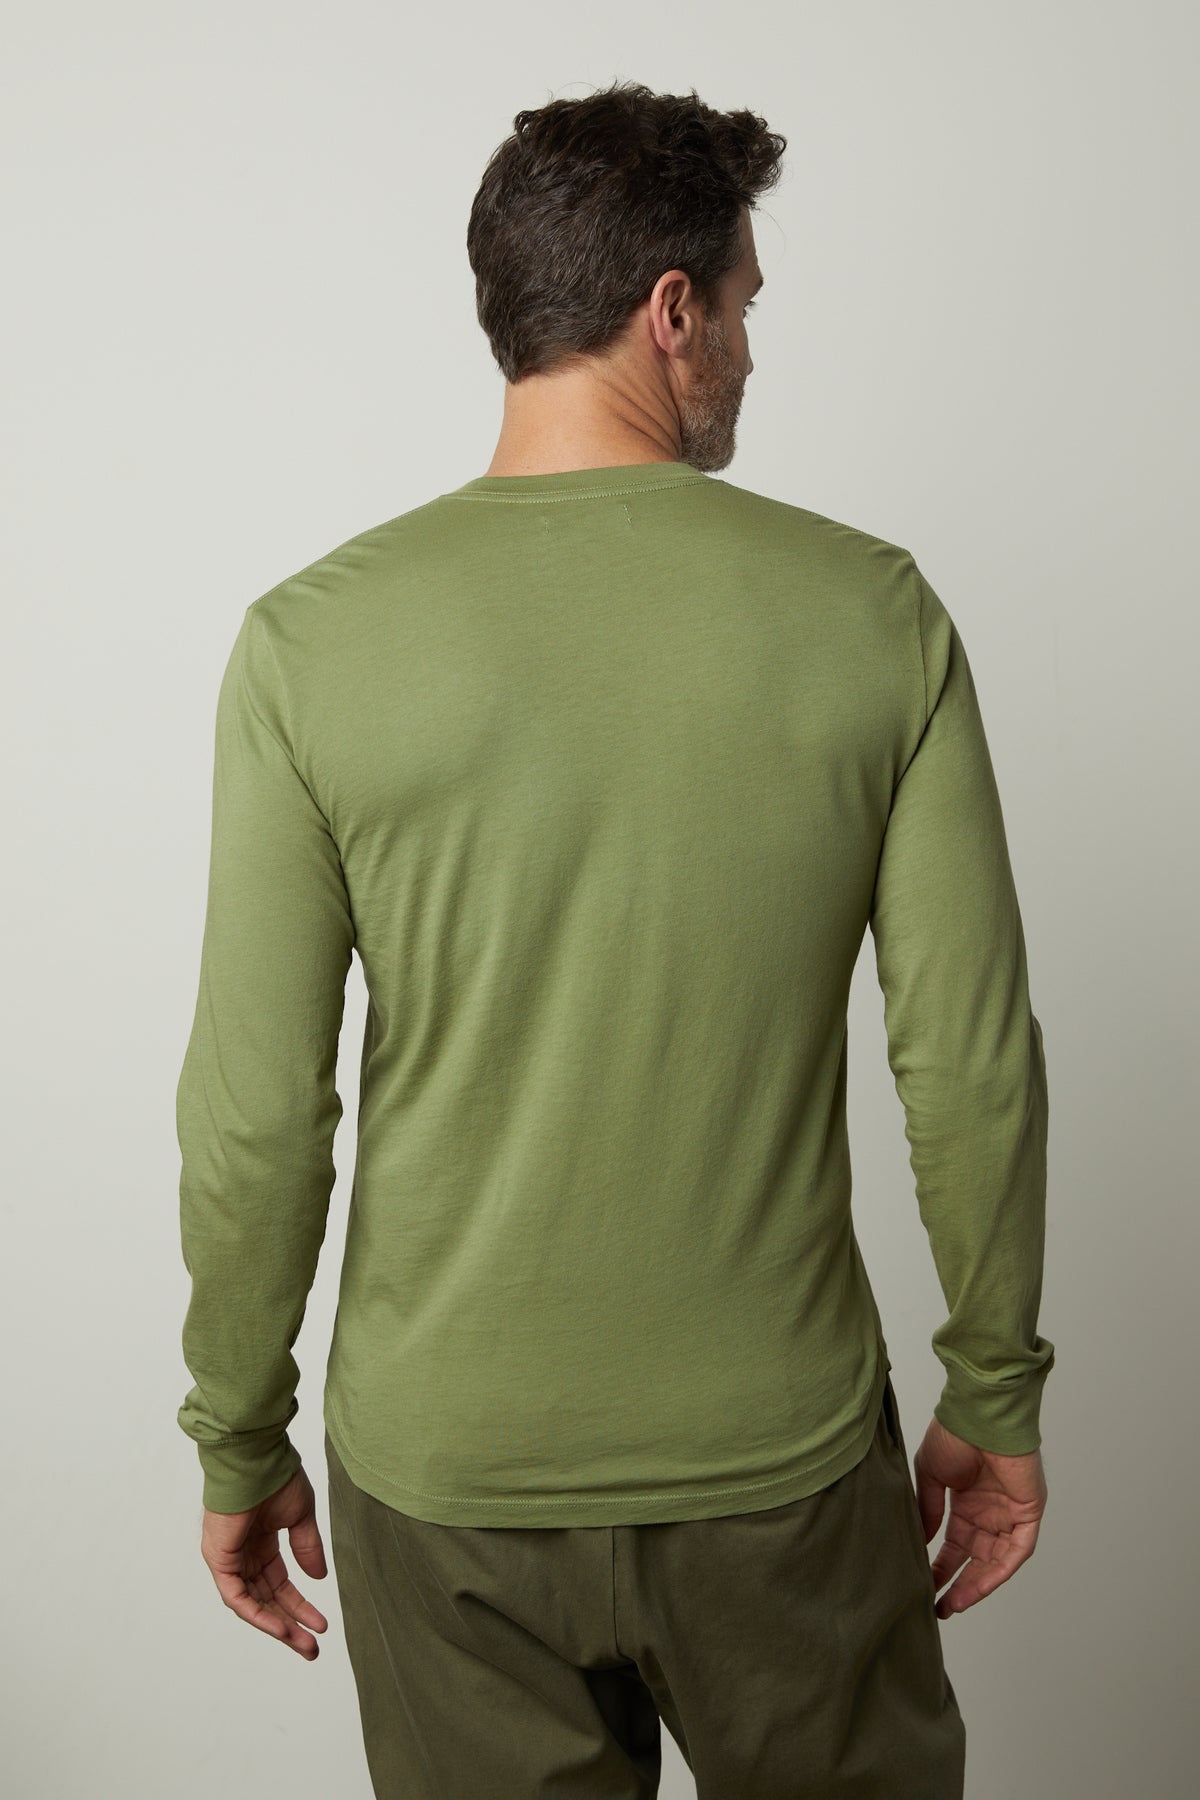 The back view of a man wearing a green BRADEN HENLEY long-sleeved shirt by Velvet by Graham & Spencer.-35567416737985